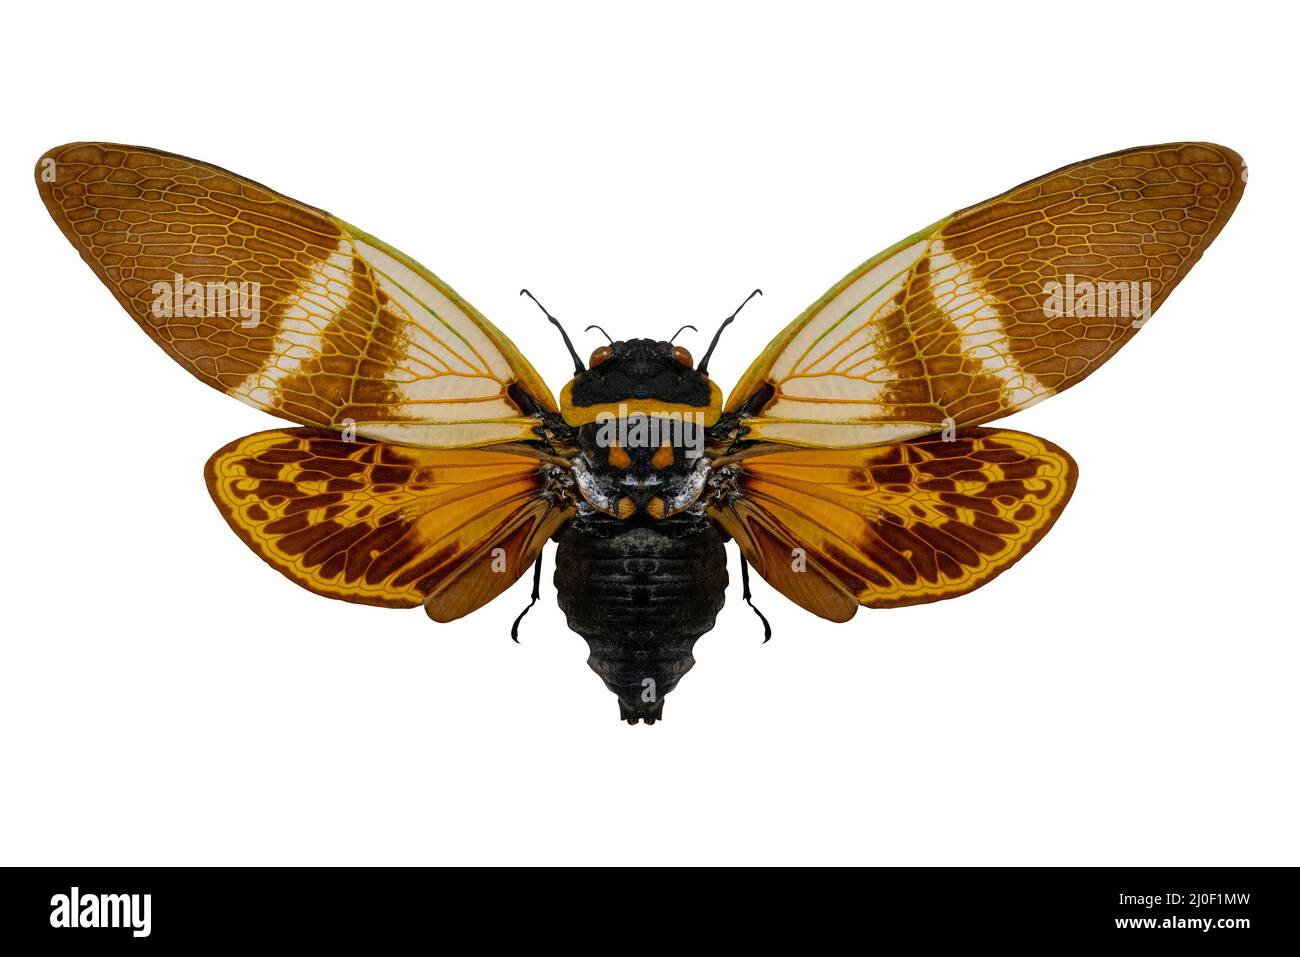 Anganiana flordula cicada flying insect. Wings and antennae of a flying insect. The world of wildlife. Stock Photo